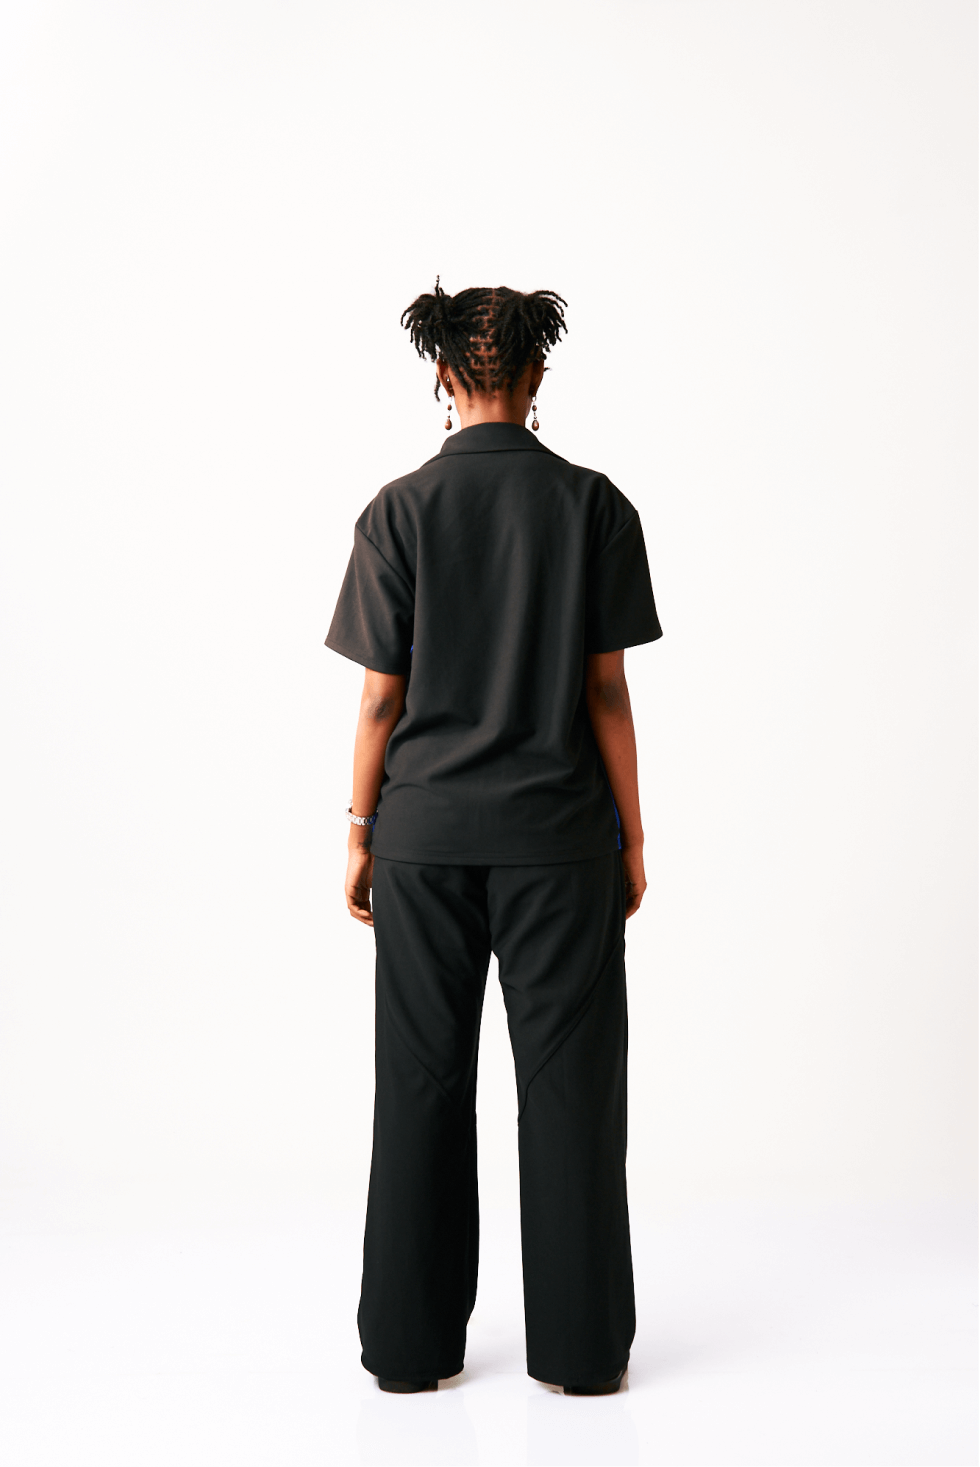 Shop Bahari Textured Pants by Metamorphisized on Arrai. Discover stylish, affordable clothing, jewelry, handbags and unique handmade pieces from top Kenyan & African fashion brands prioritising sustainability and quality craftsmanship.